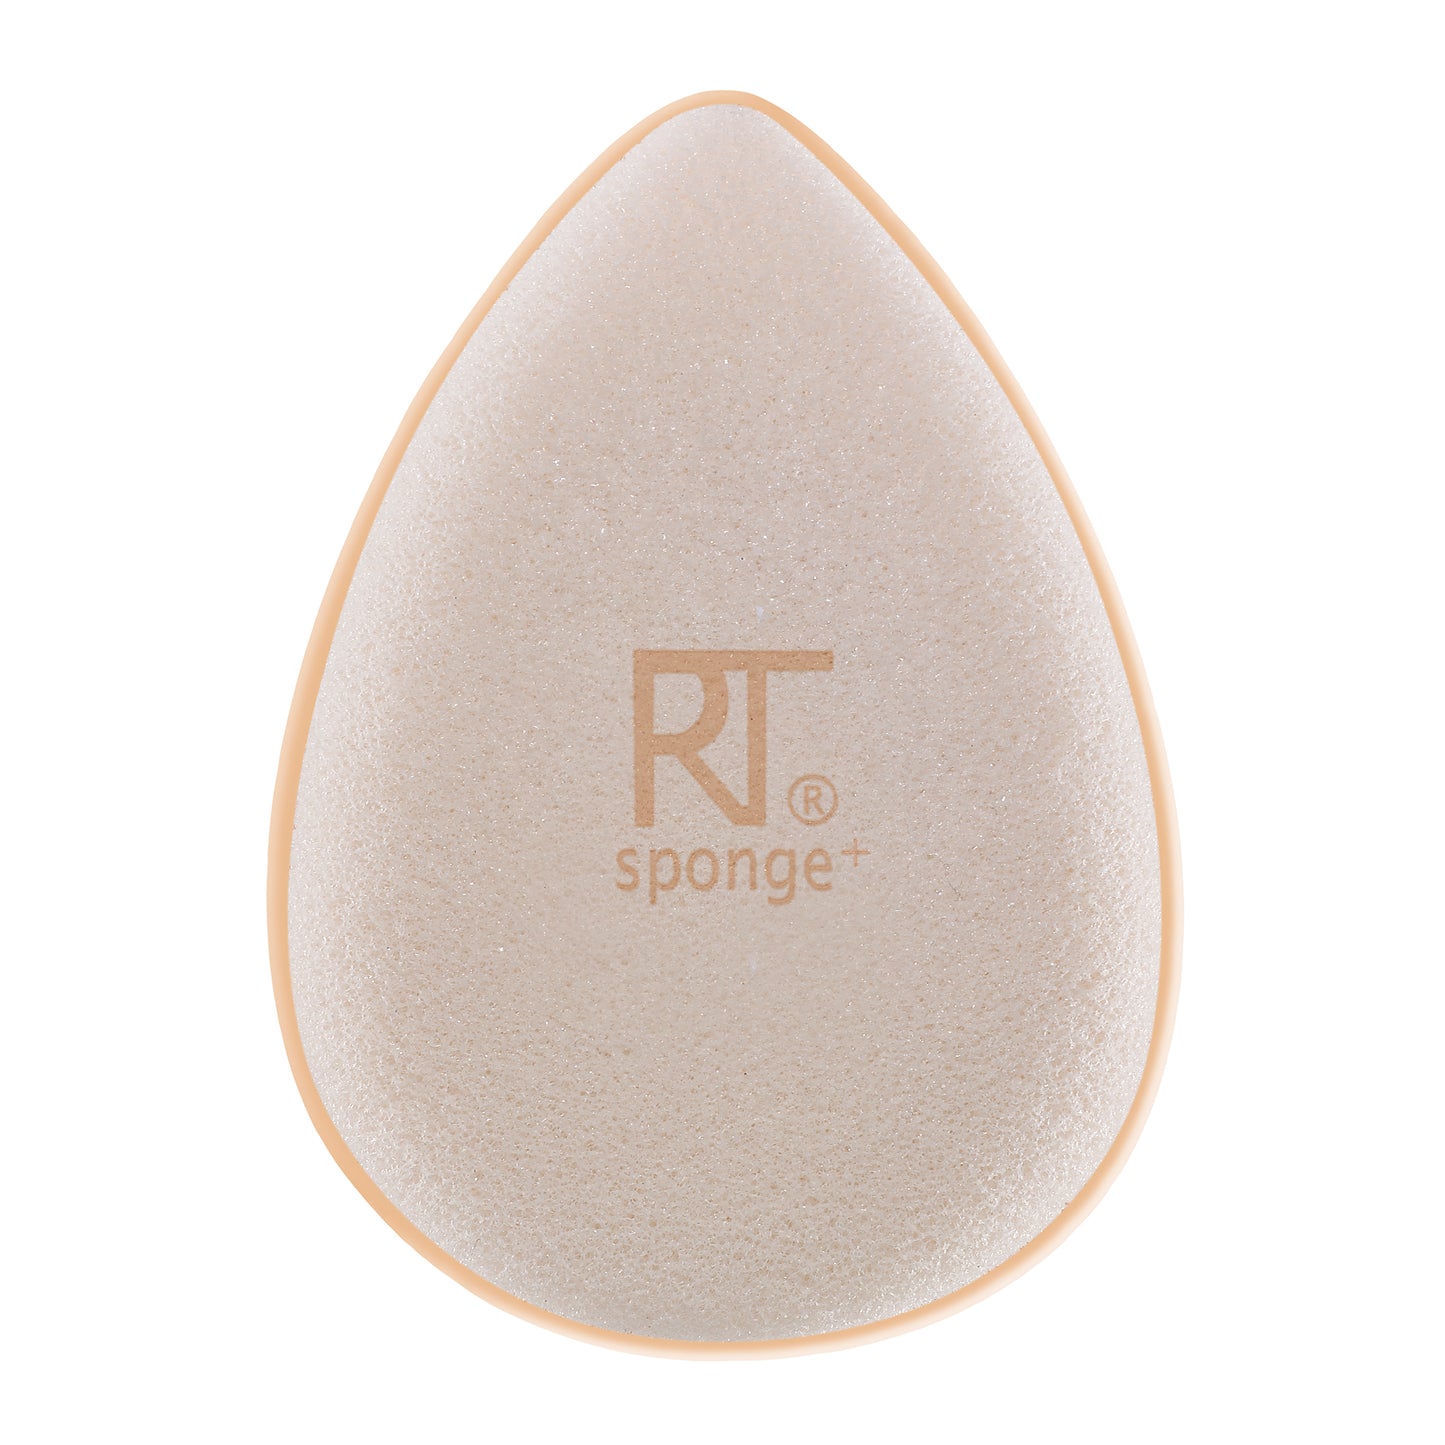 Real Techniques Sponge+, Skin Care Facial Cleanser Tool, with Probiotics, exfoliate and clean pores, Miracle Complexion Sponge